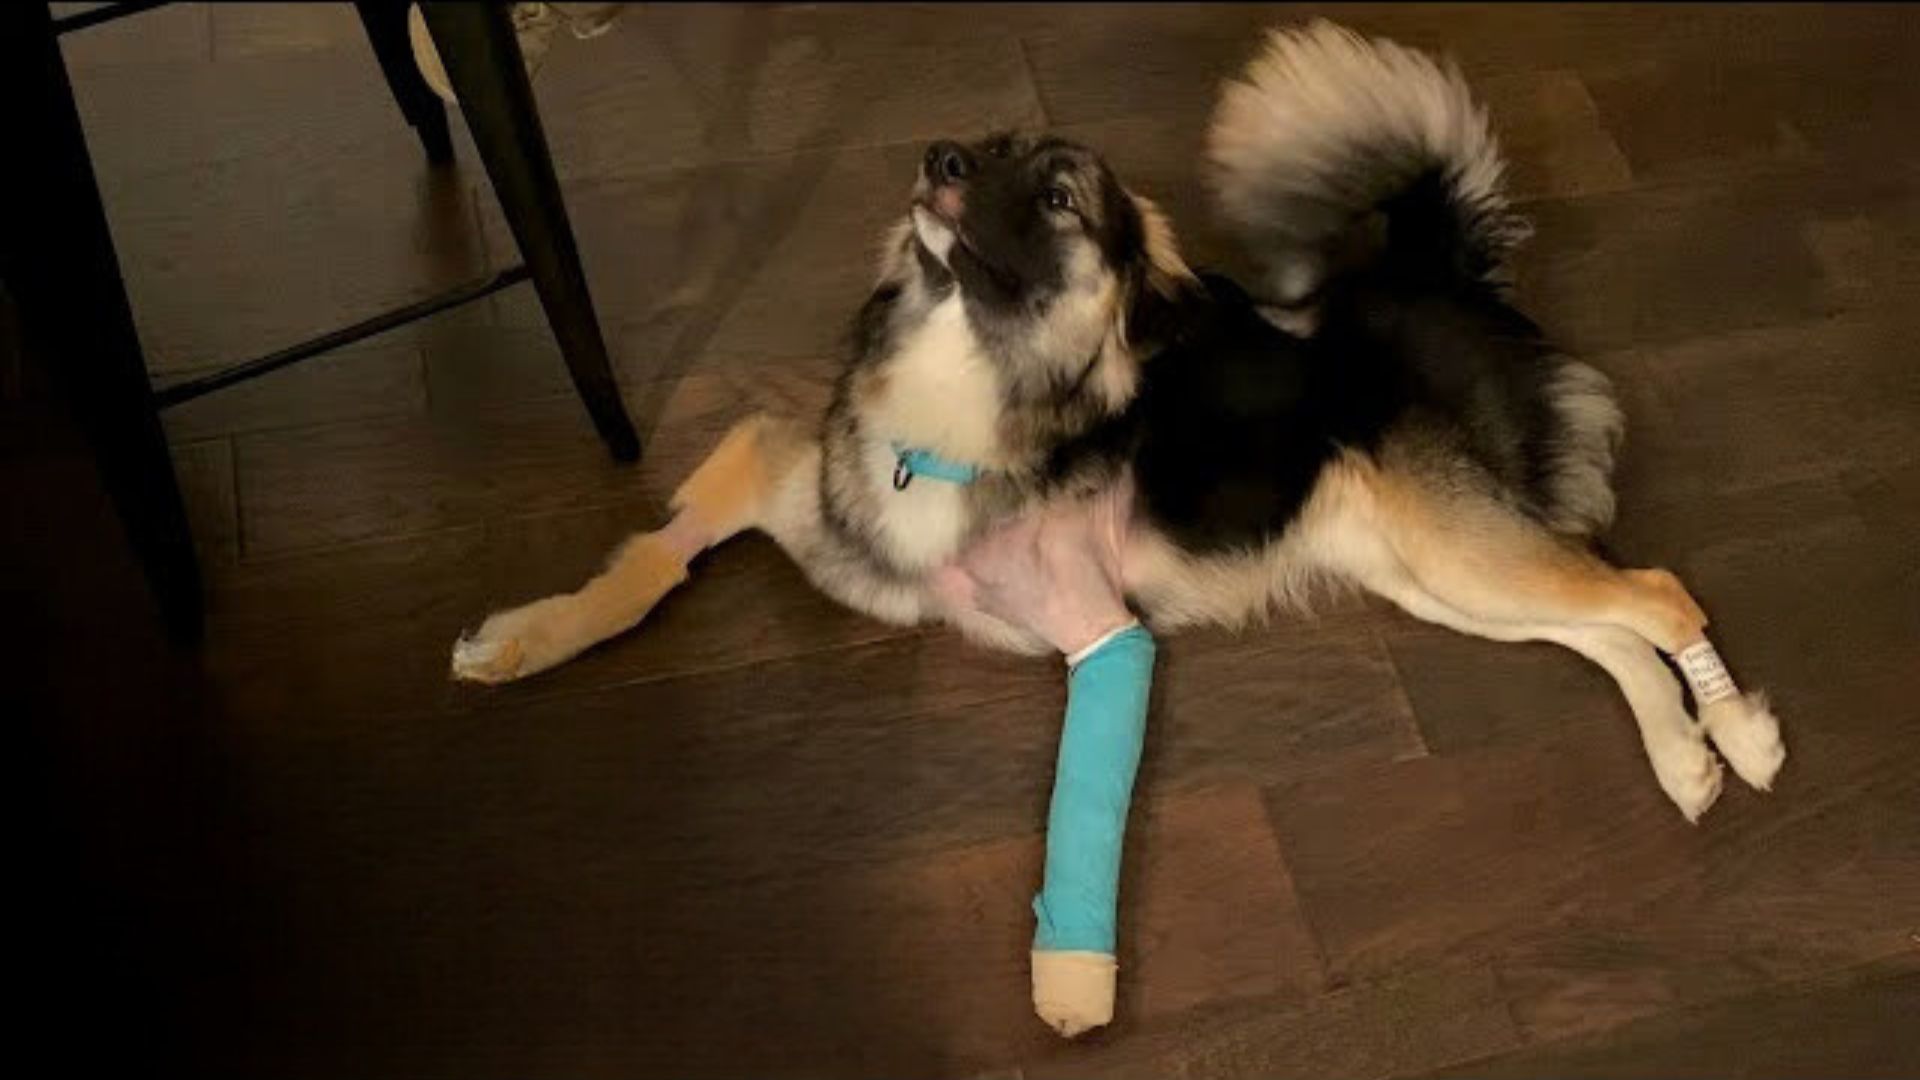 Injured Rescue Dog Feels True Freedom For The First Time After Surgery